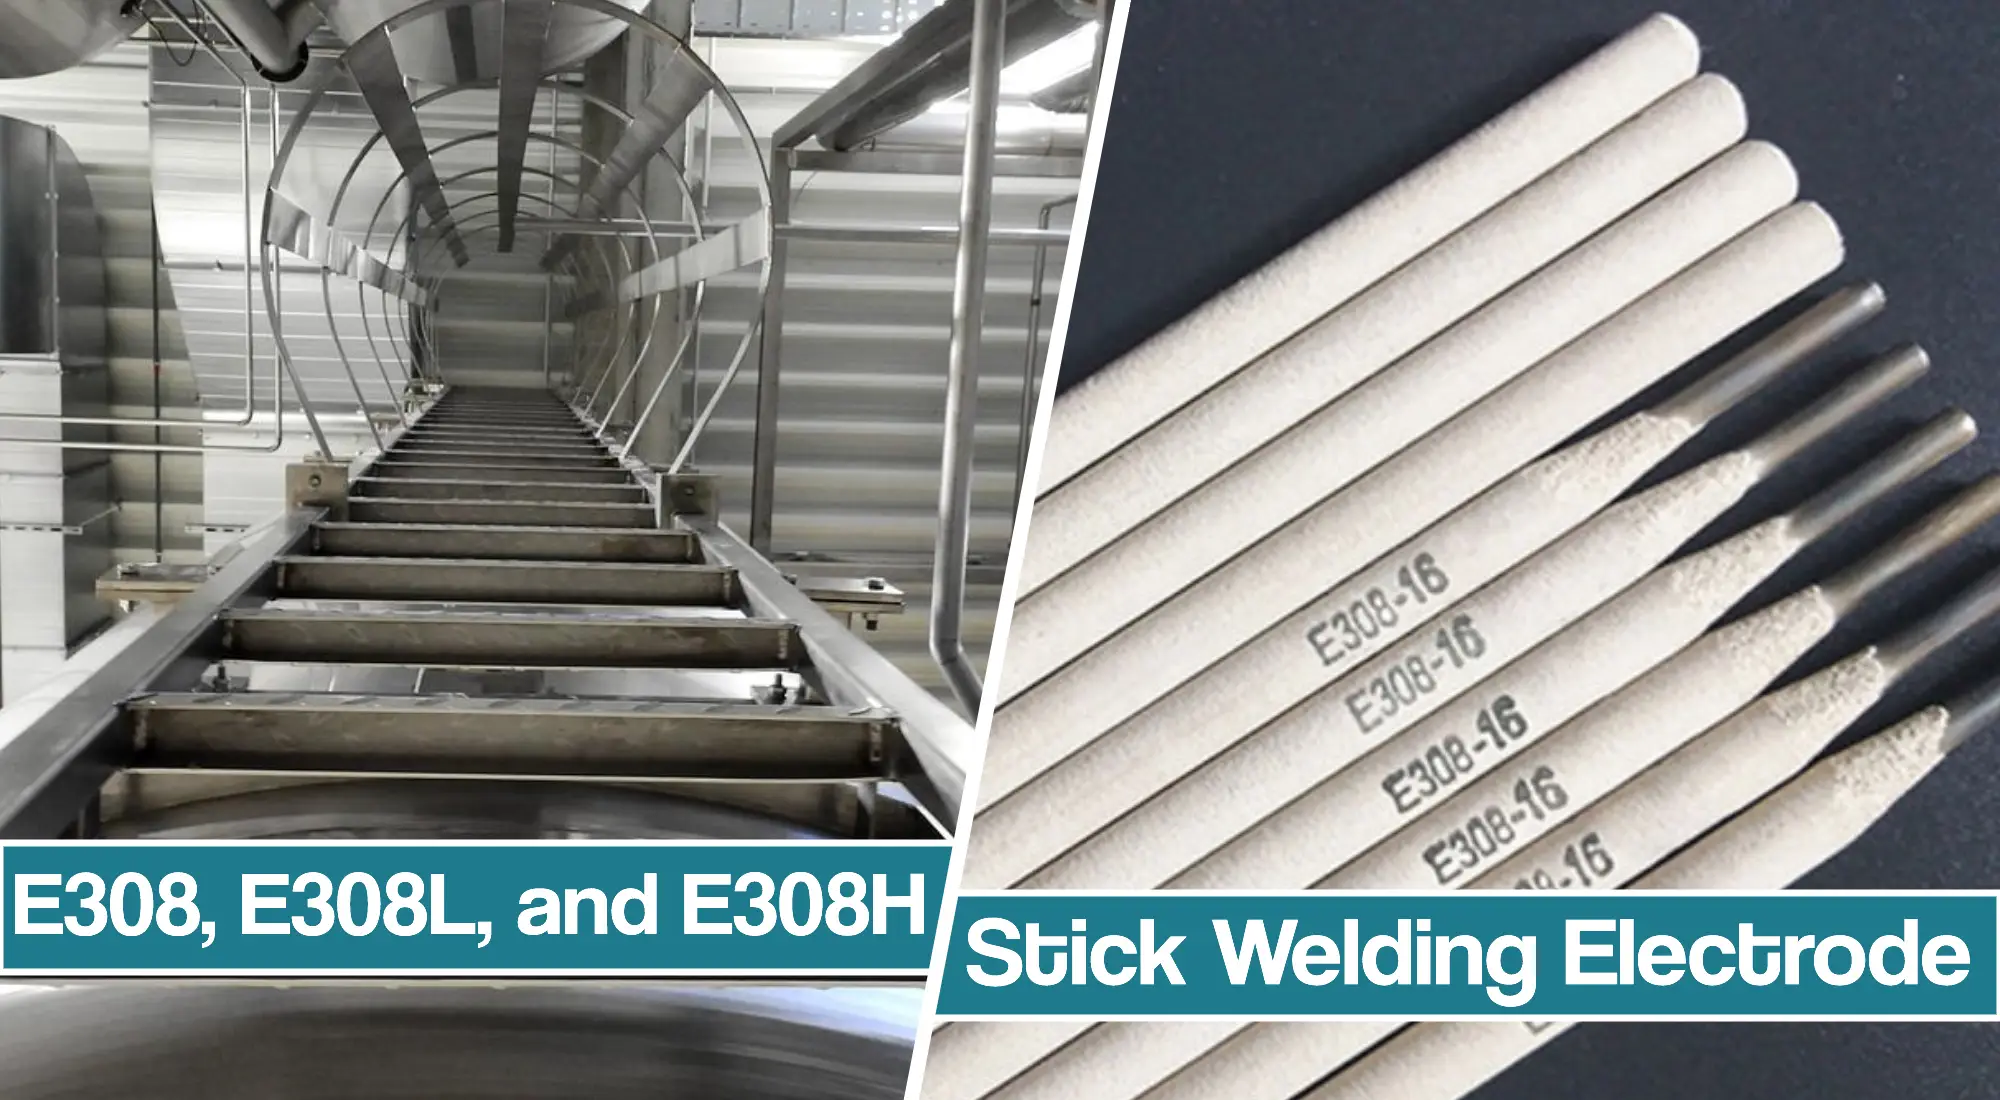 E308, E308L, and E308H Stainless Steel Stick Welding Electrode